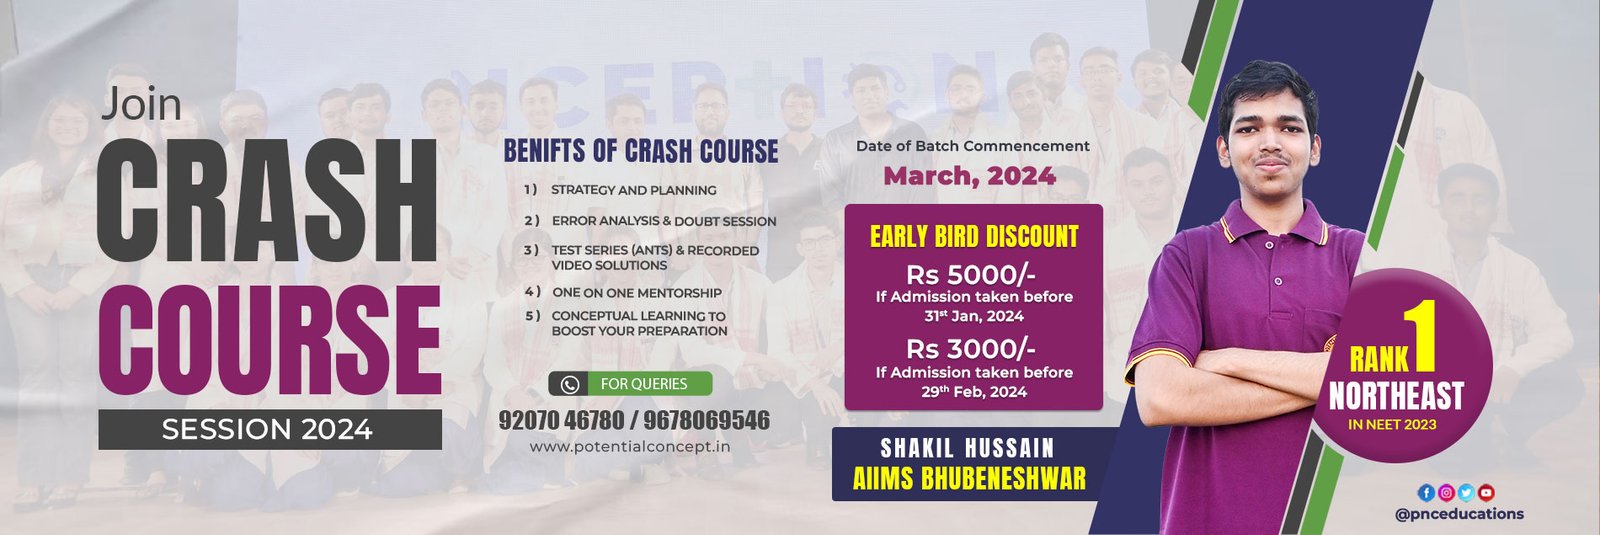 Crash course for JEE and NEET aspirants in 2024